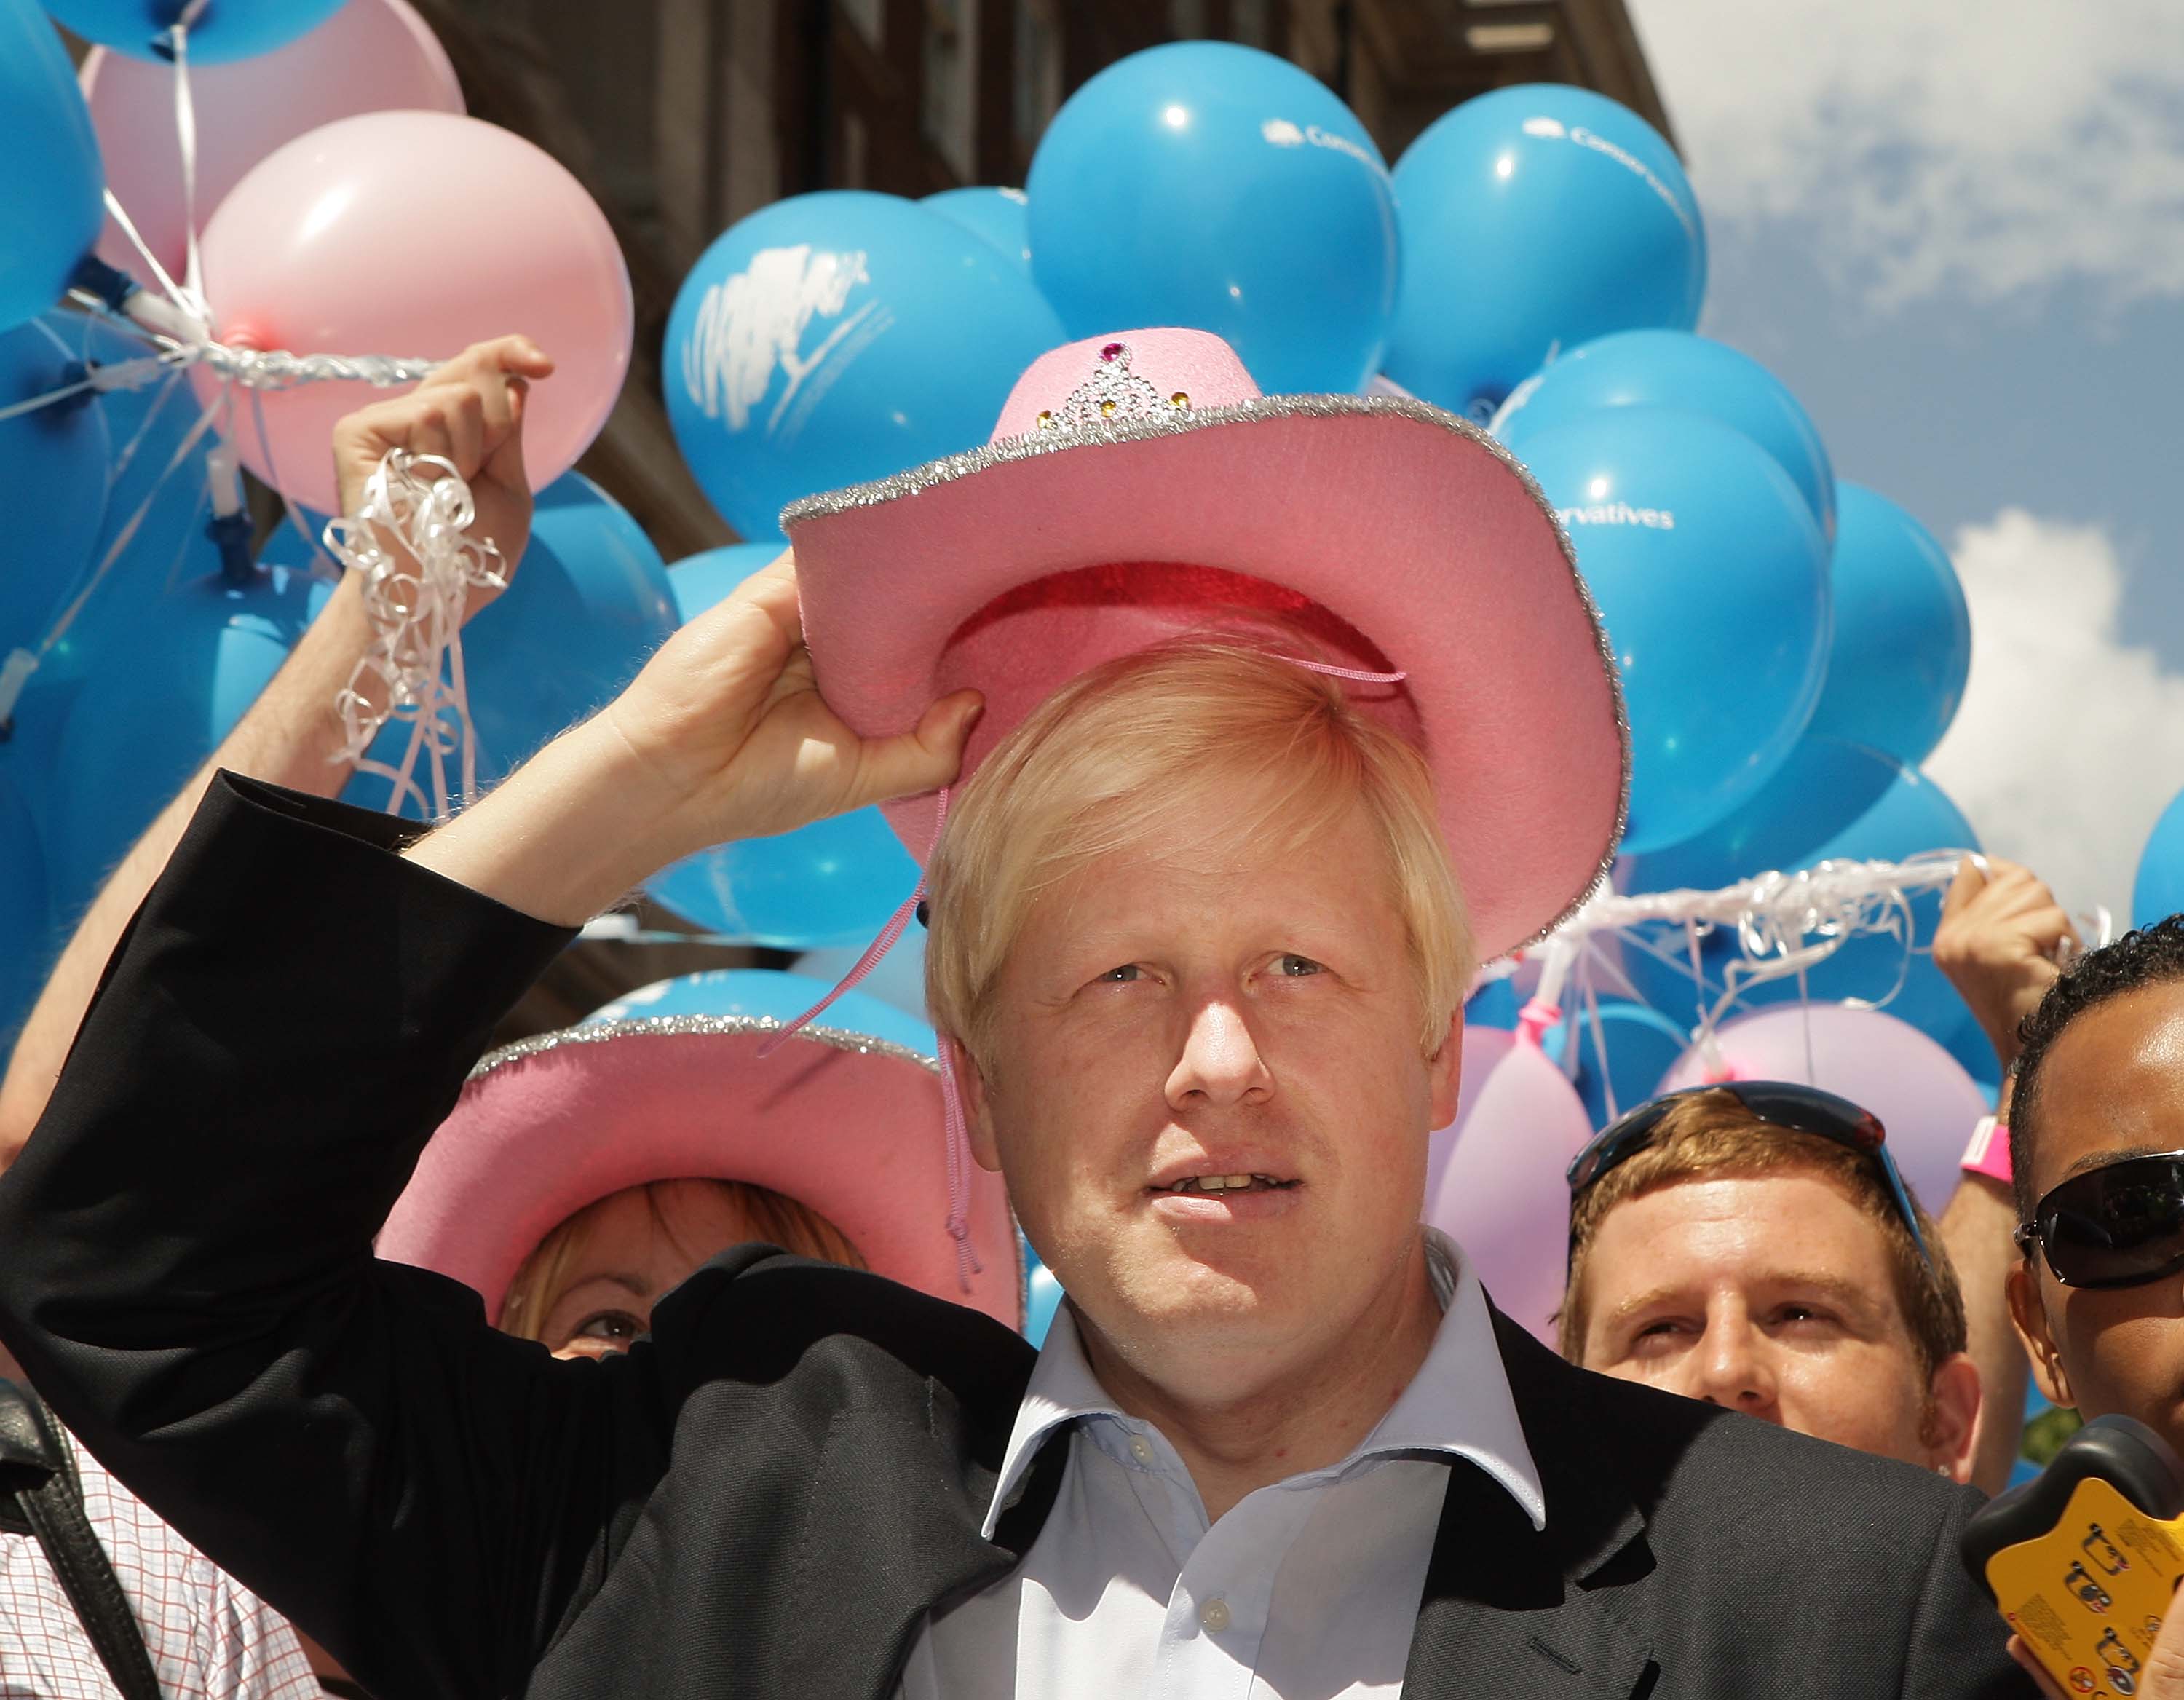 Mayor of London Boris Johnson wears a pink stetson hat at the Gay Pride parade on July 5,